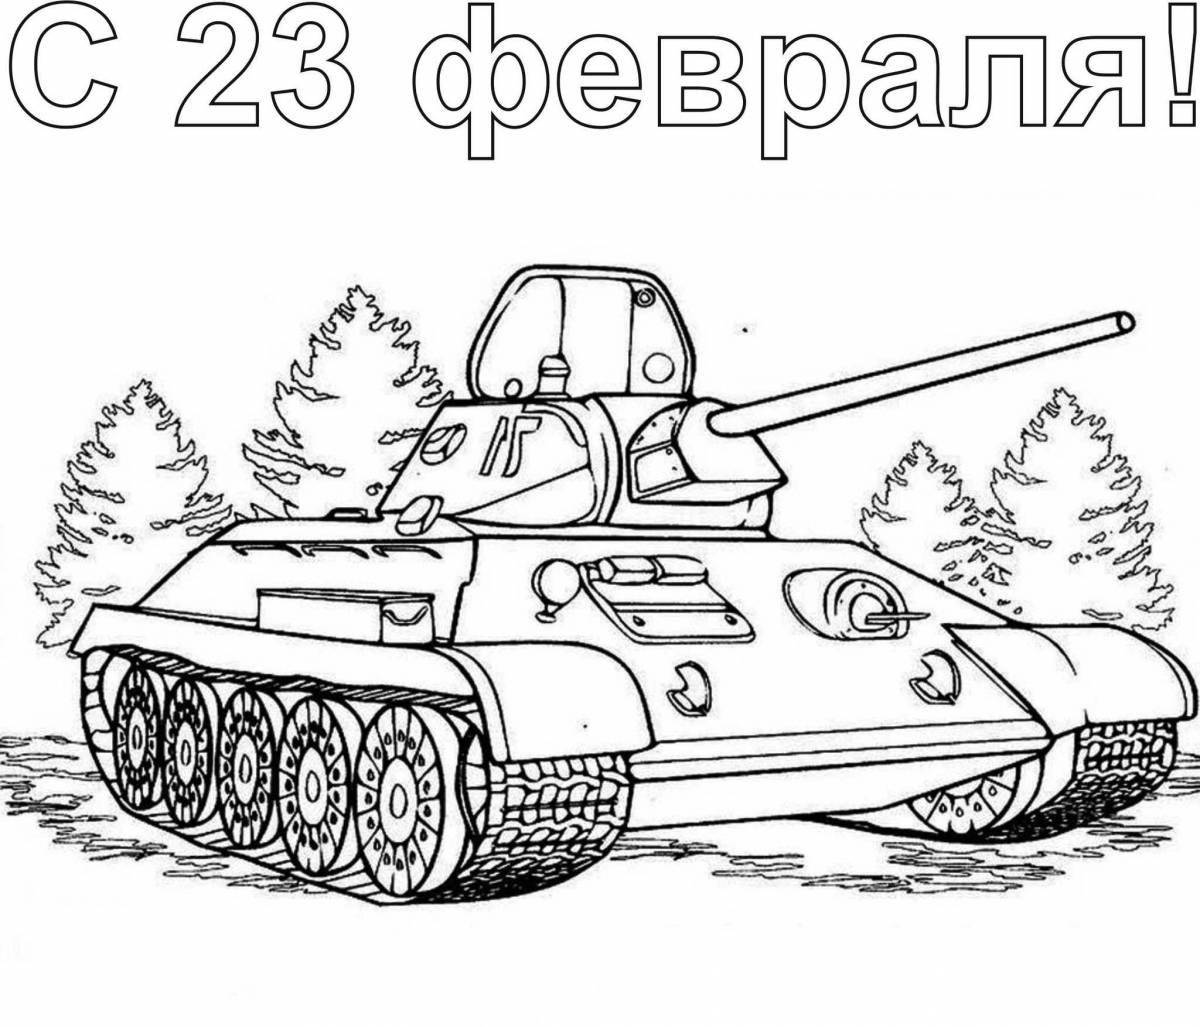 Charming tank t35 coloring book